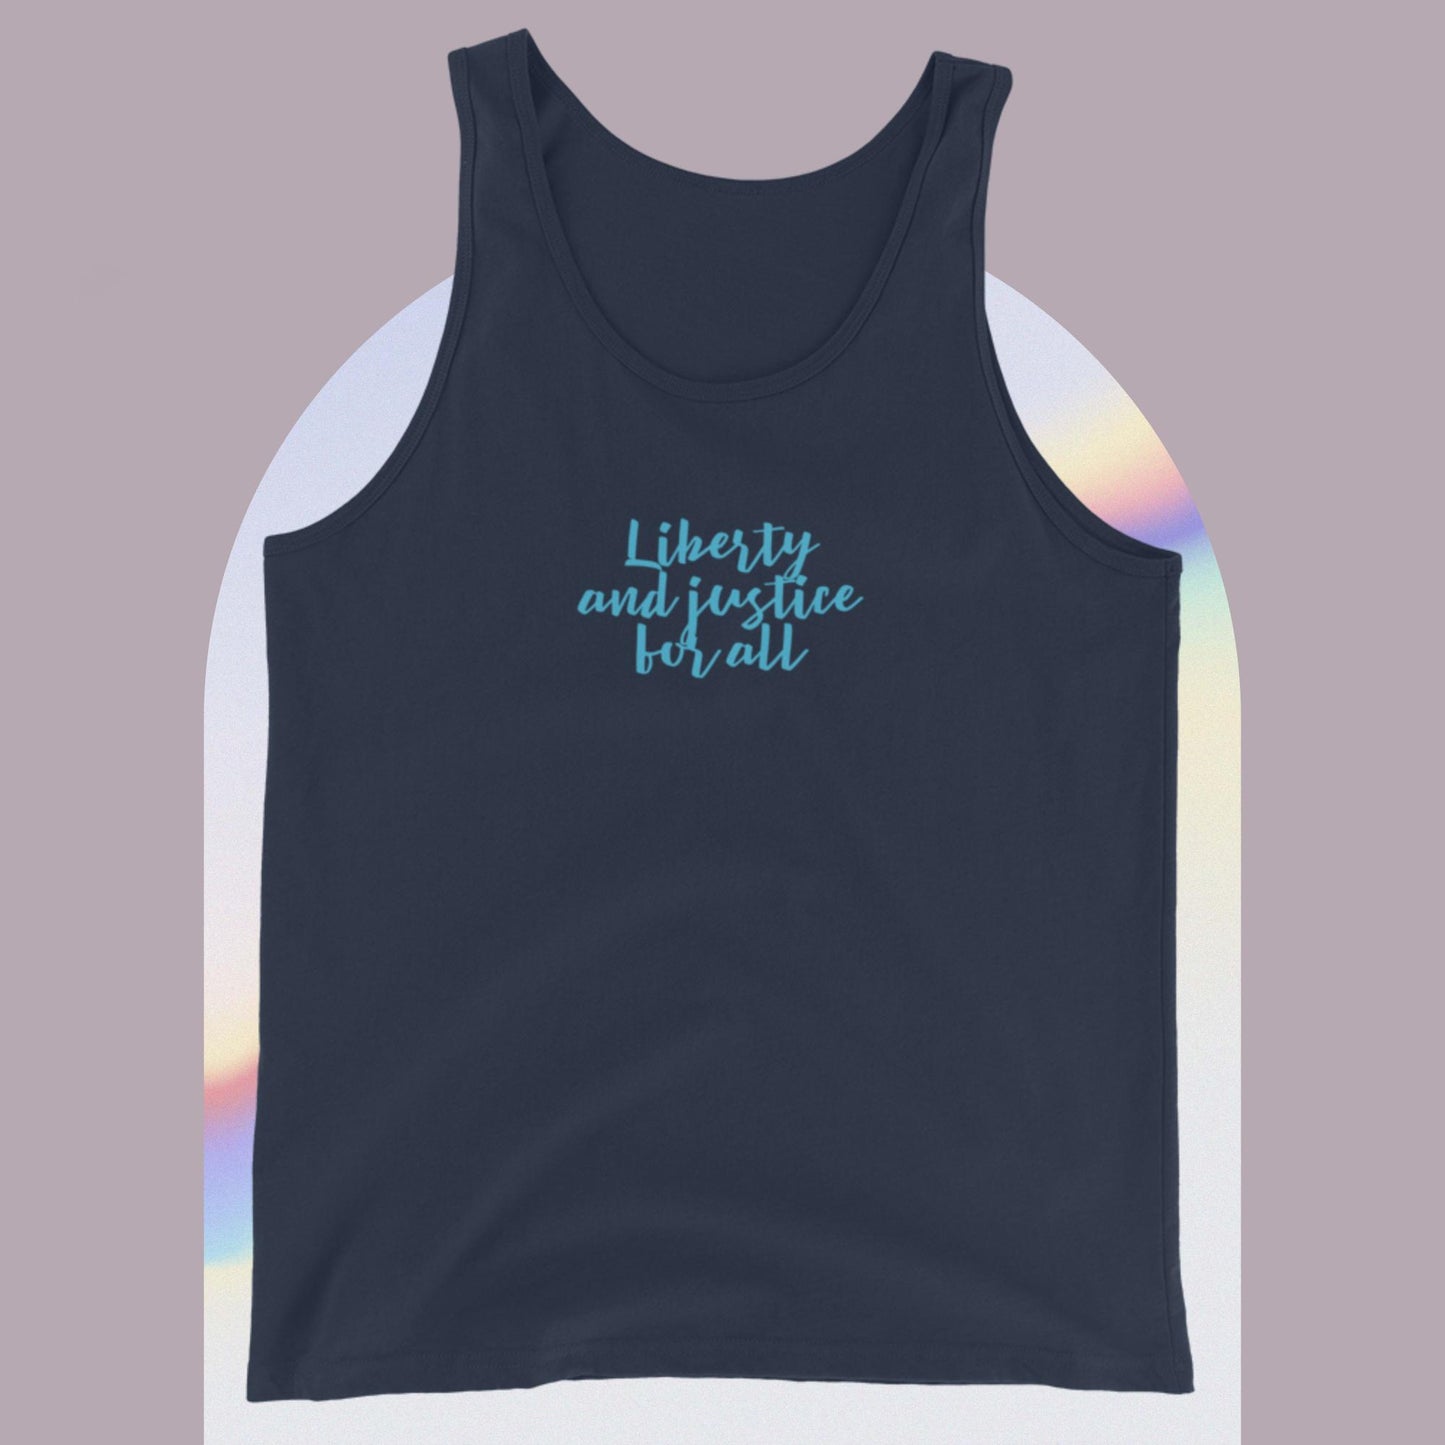 Liberty and justice for all, Unisex Tank Top